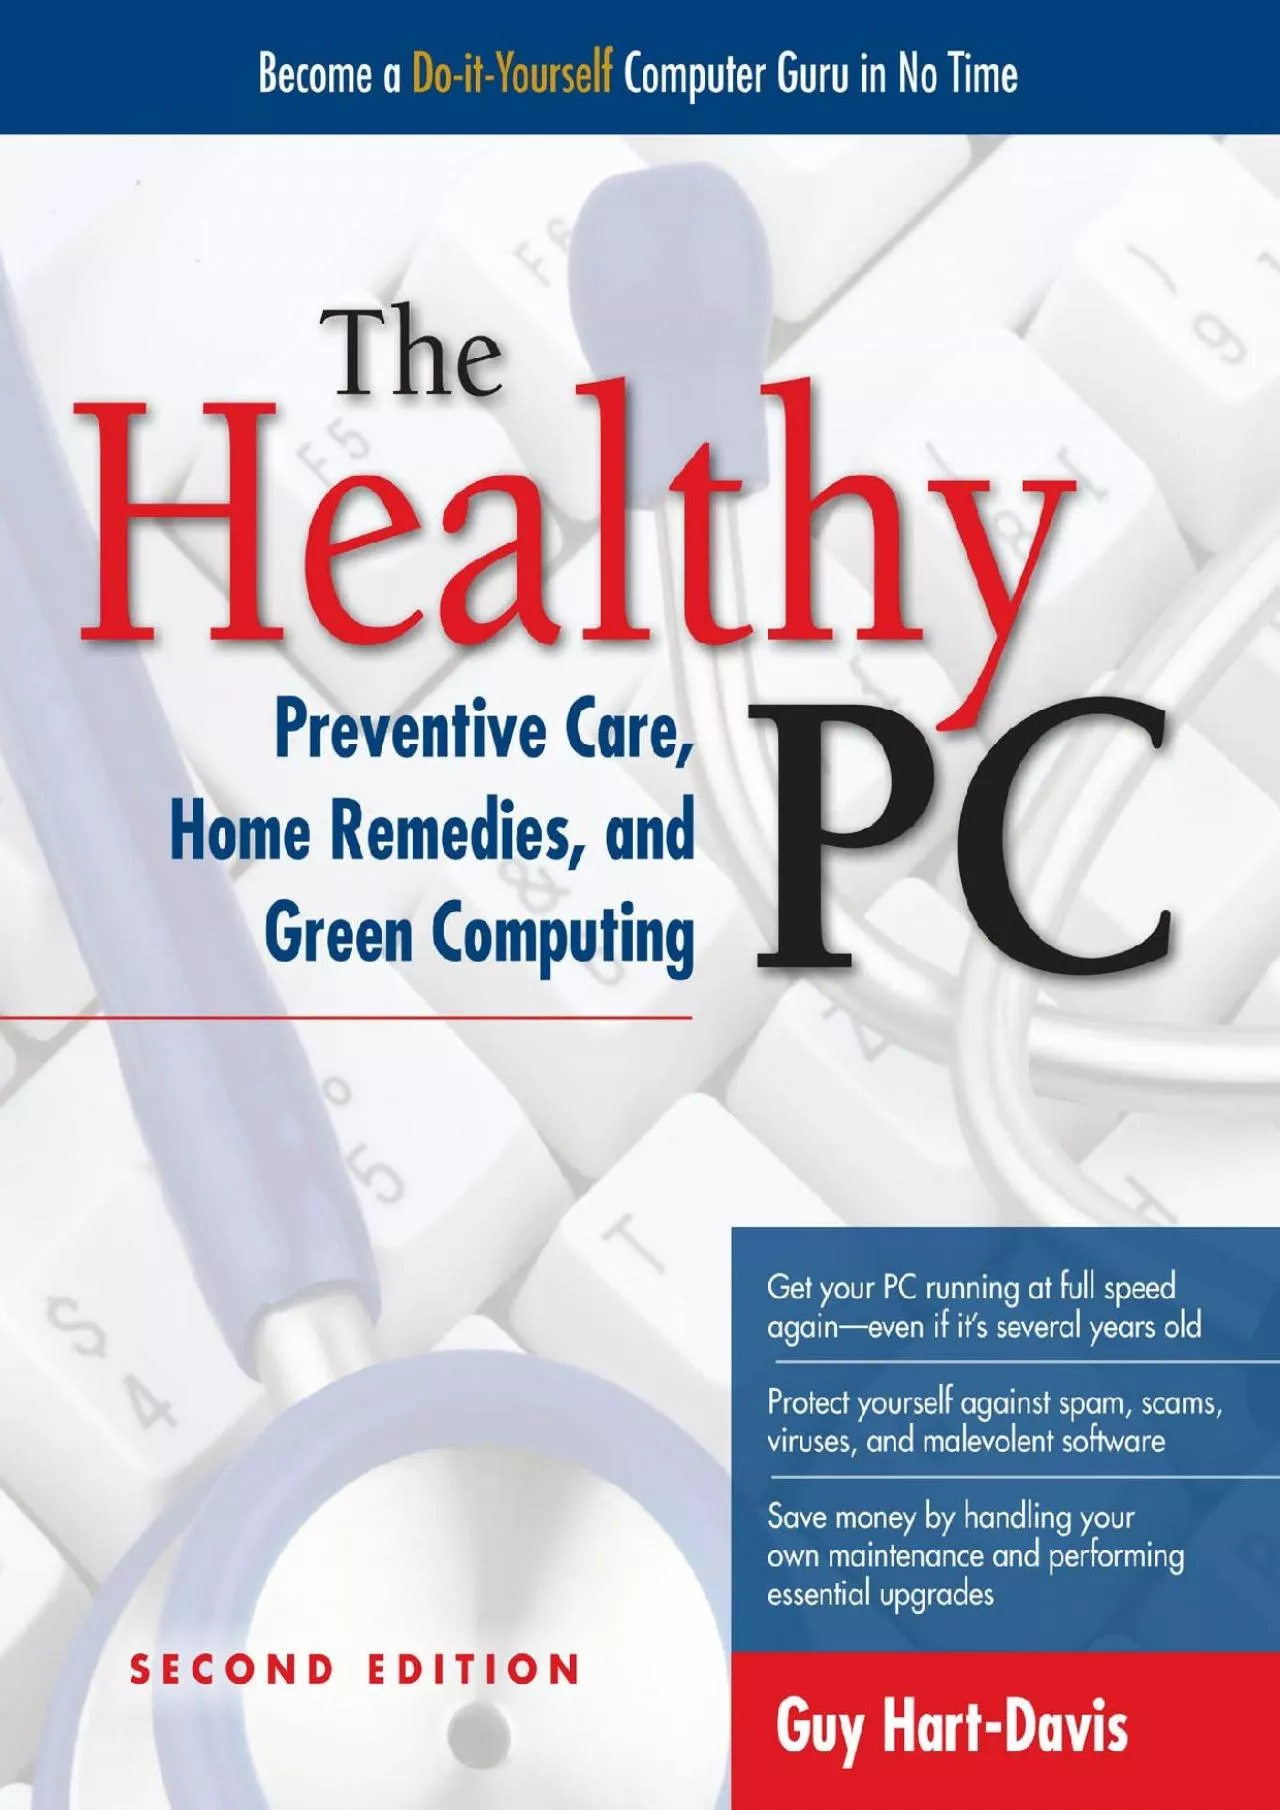 [DOWLOAD]-The Healthy PC: Preventive Care, Home Remedies, and Green Computing, 2nd Edition